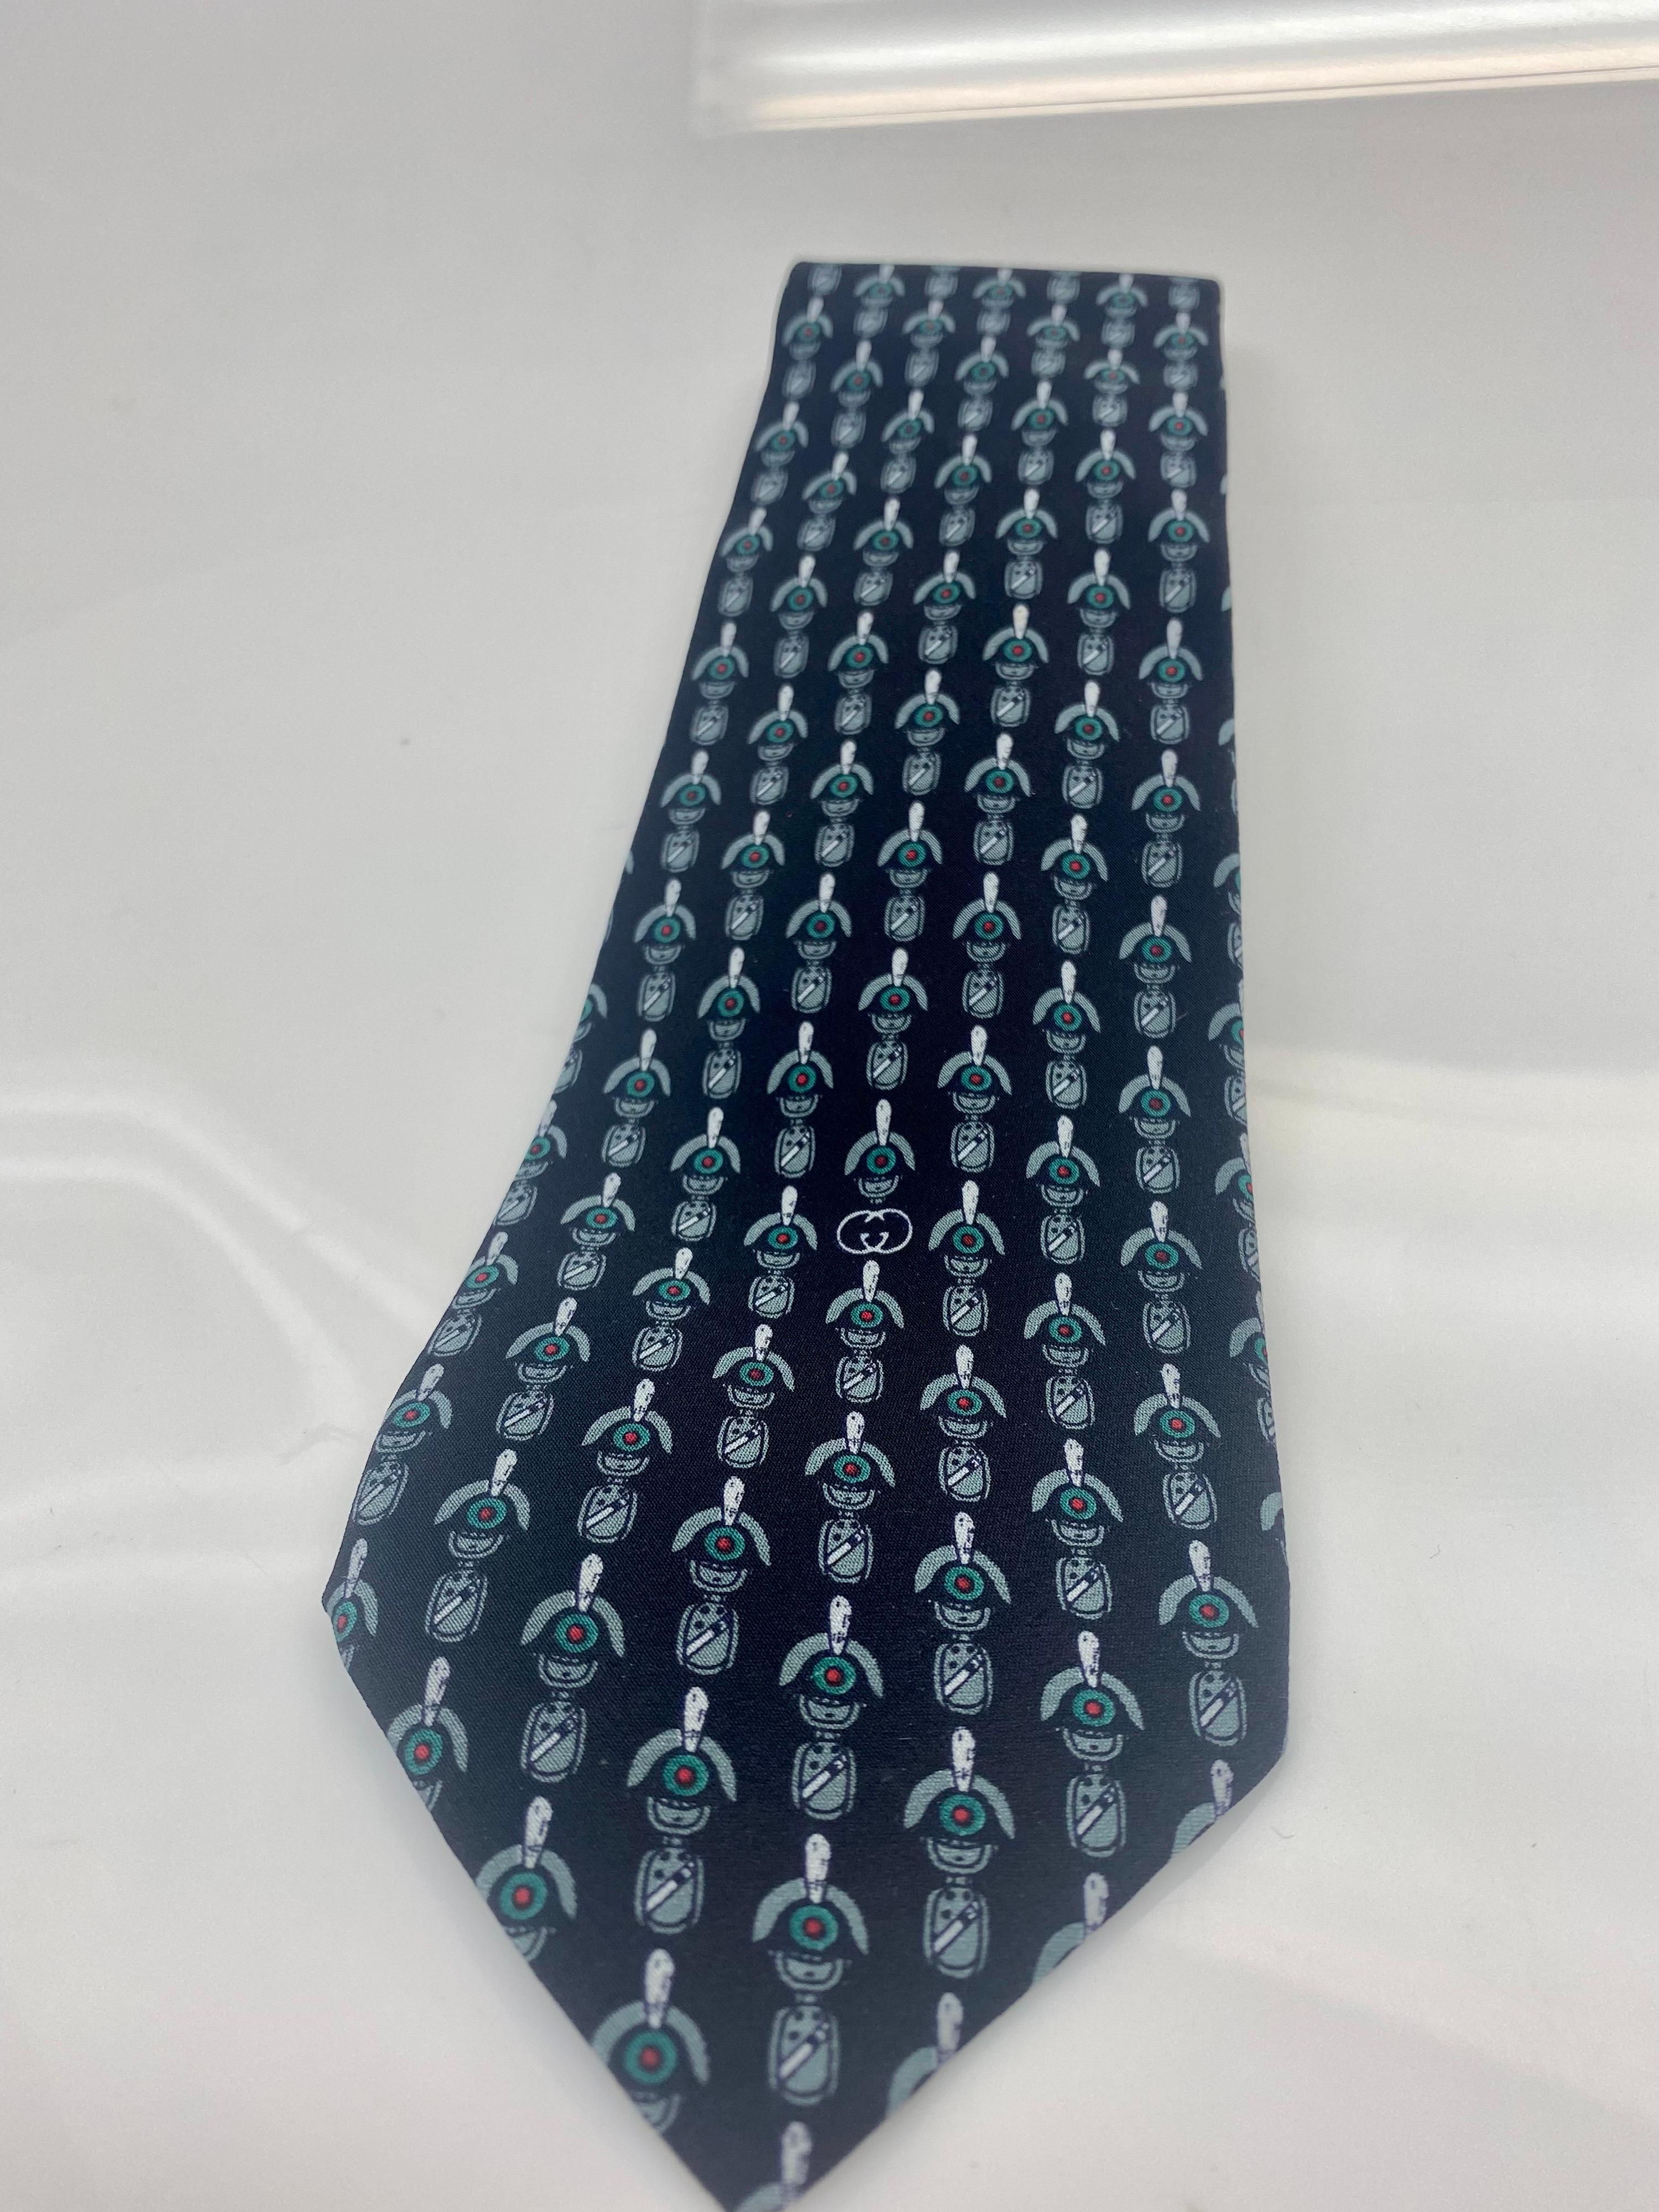 Gucci silk black, green and white print tie. 
Sophisticated and classic piece and a perfect addition to any wardrobe. Item is in good condition, wear consistent with age. 

Width: 3.3